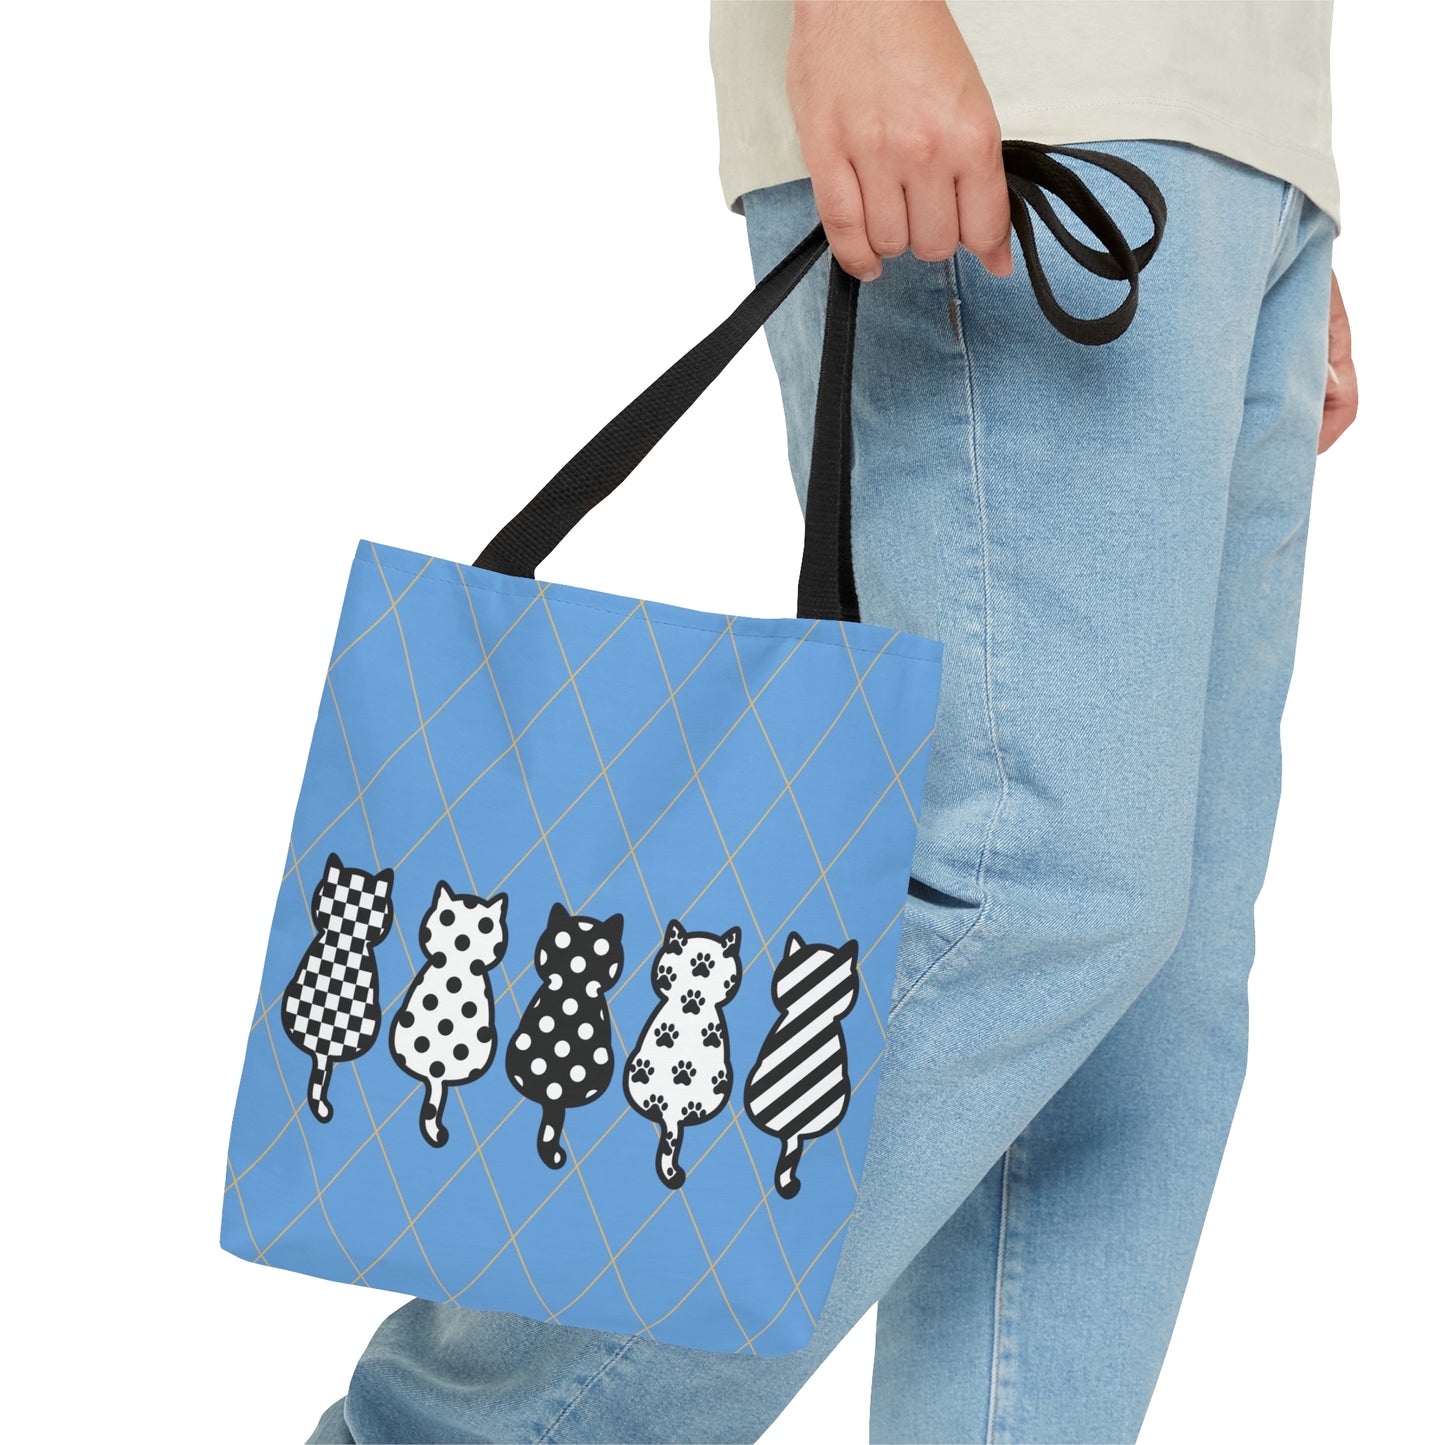 Diamond pattern with Five Cat's Design Tote Bag (AOP)